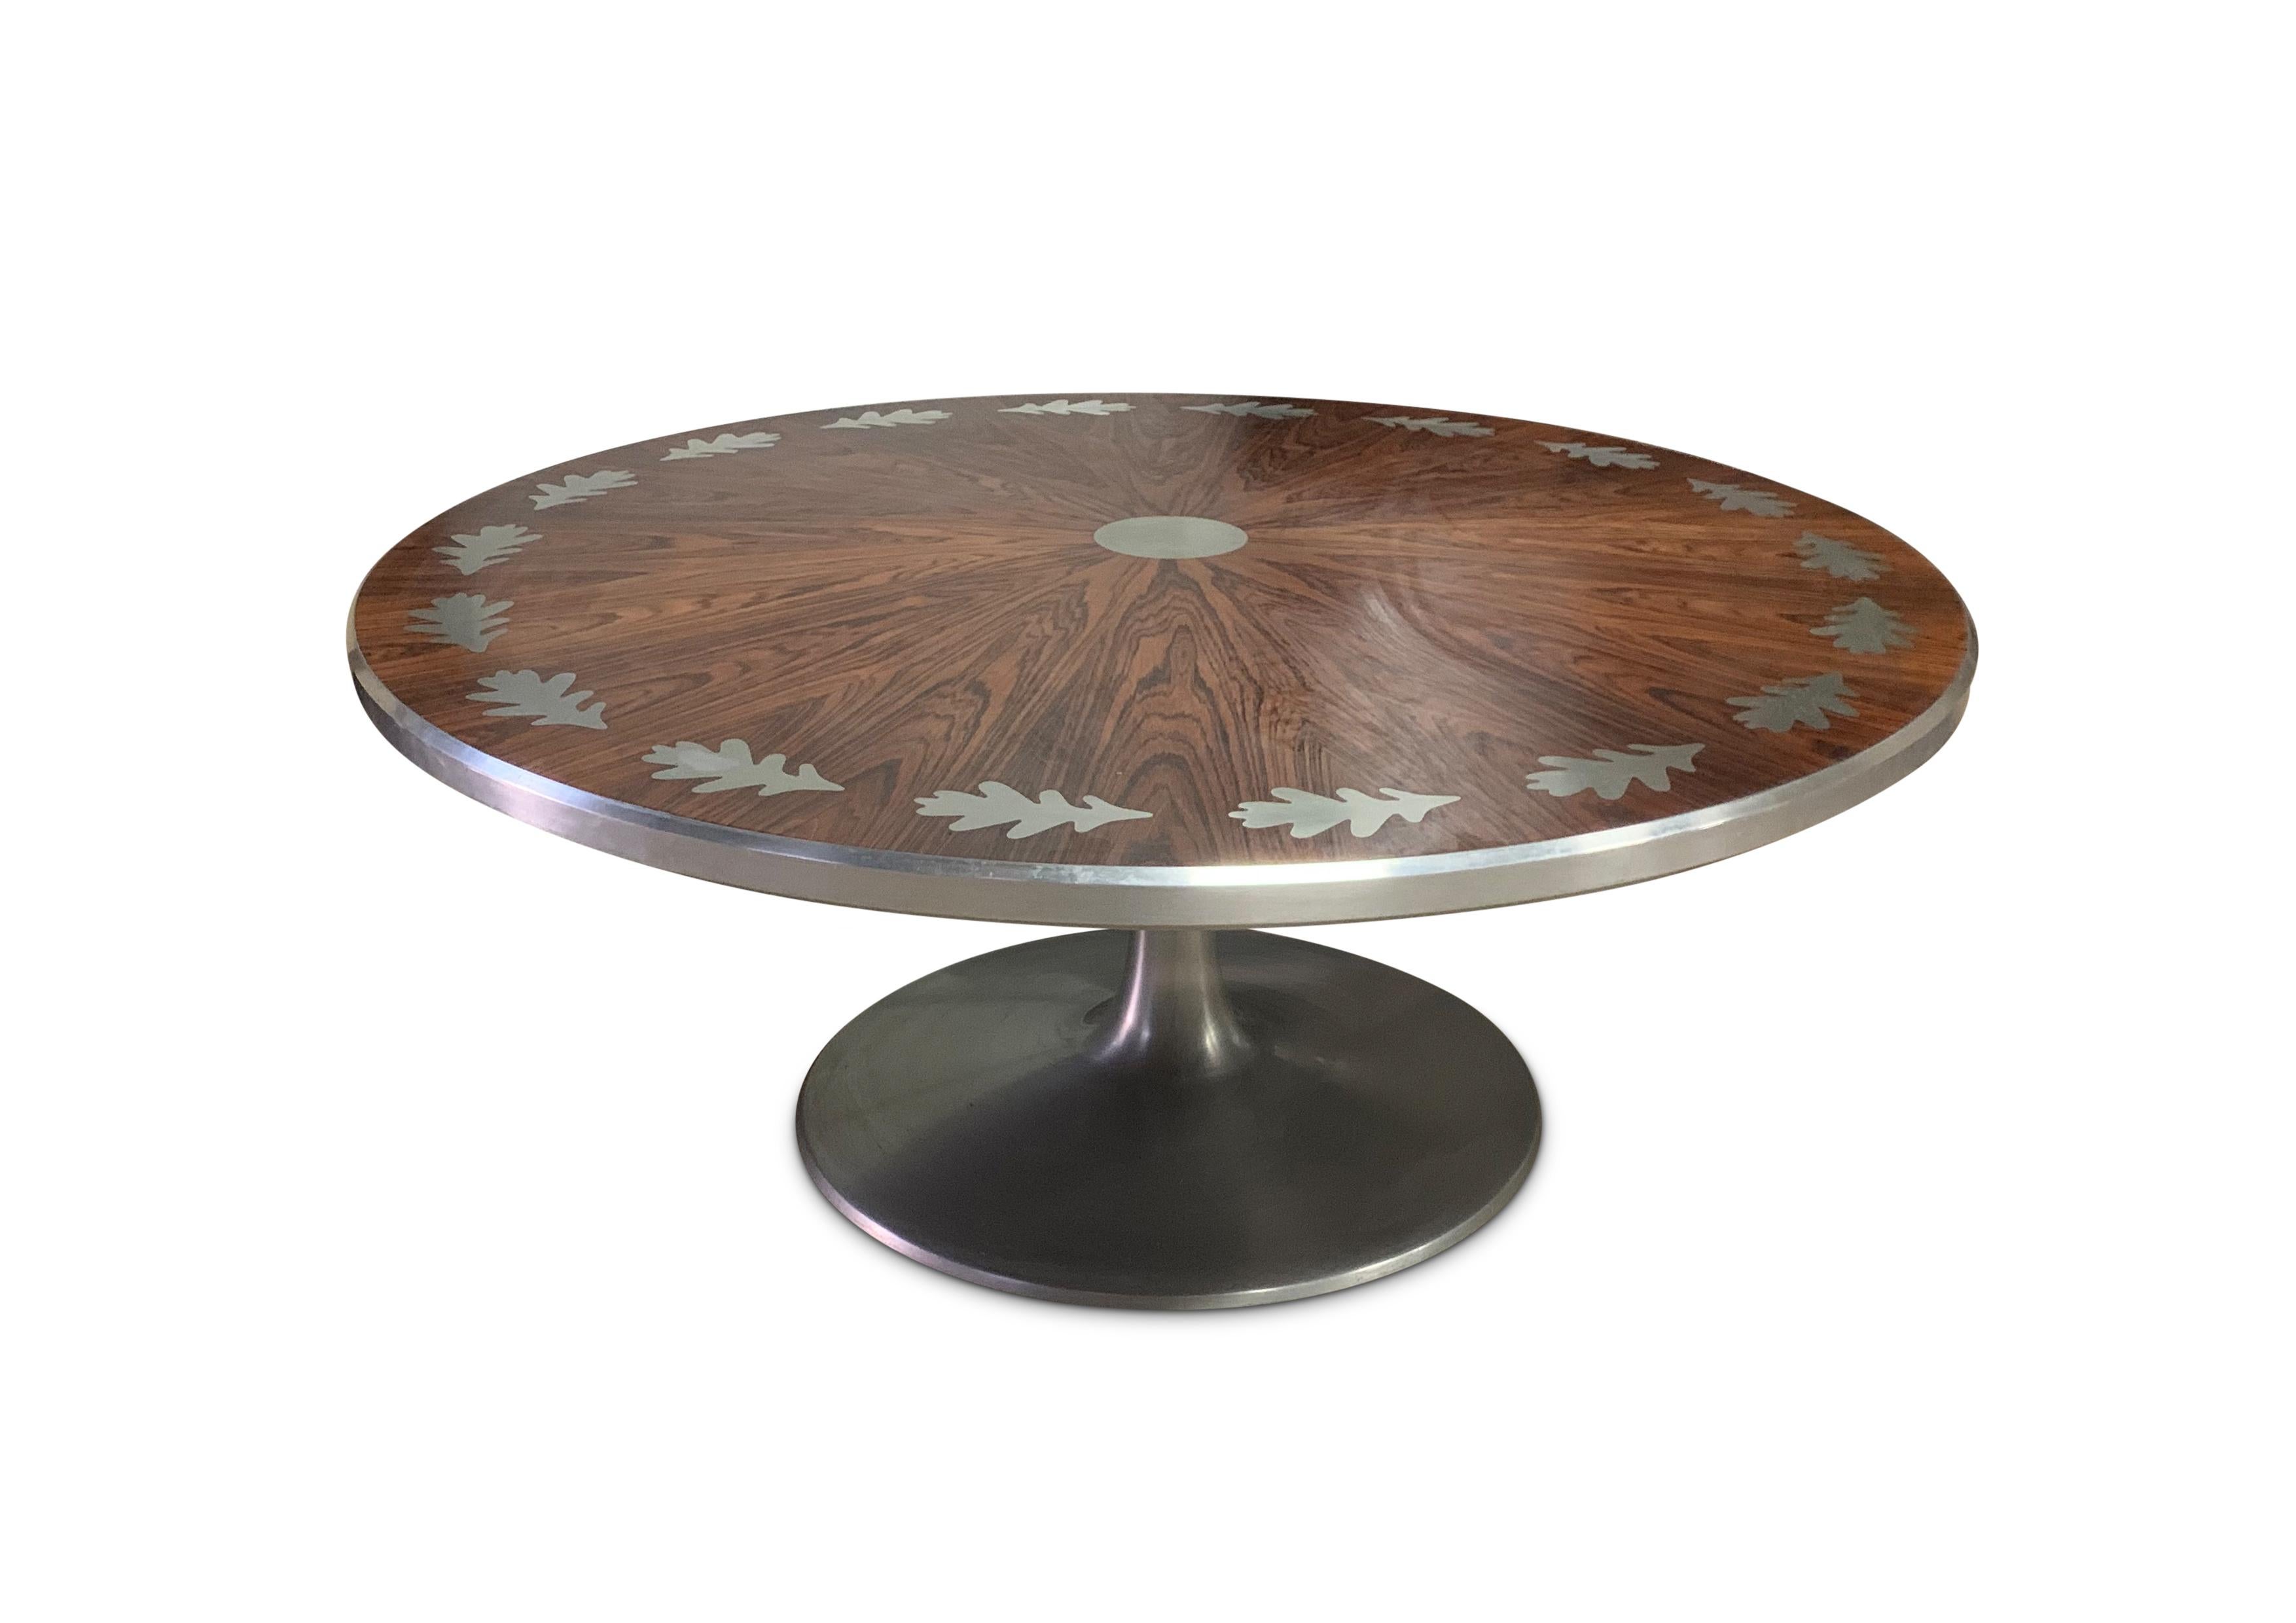 Poul Cadovius Rosewood Coffee Table Designed For France & Son Circular Top Inlaid With Brushed Chrome Floral Decoration Made In Denmark 1960's

Poul Cadovius (1911 - 2011) was one of the most colourful and successful persons in the history of